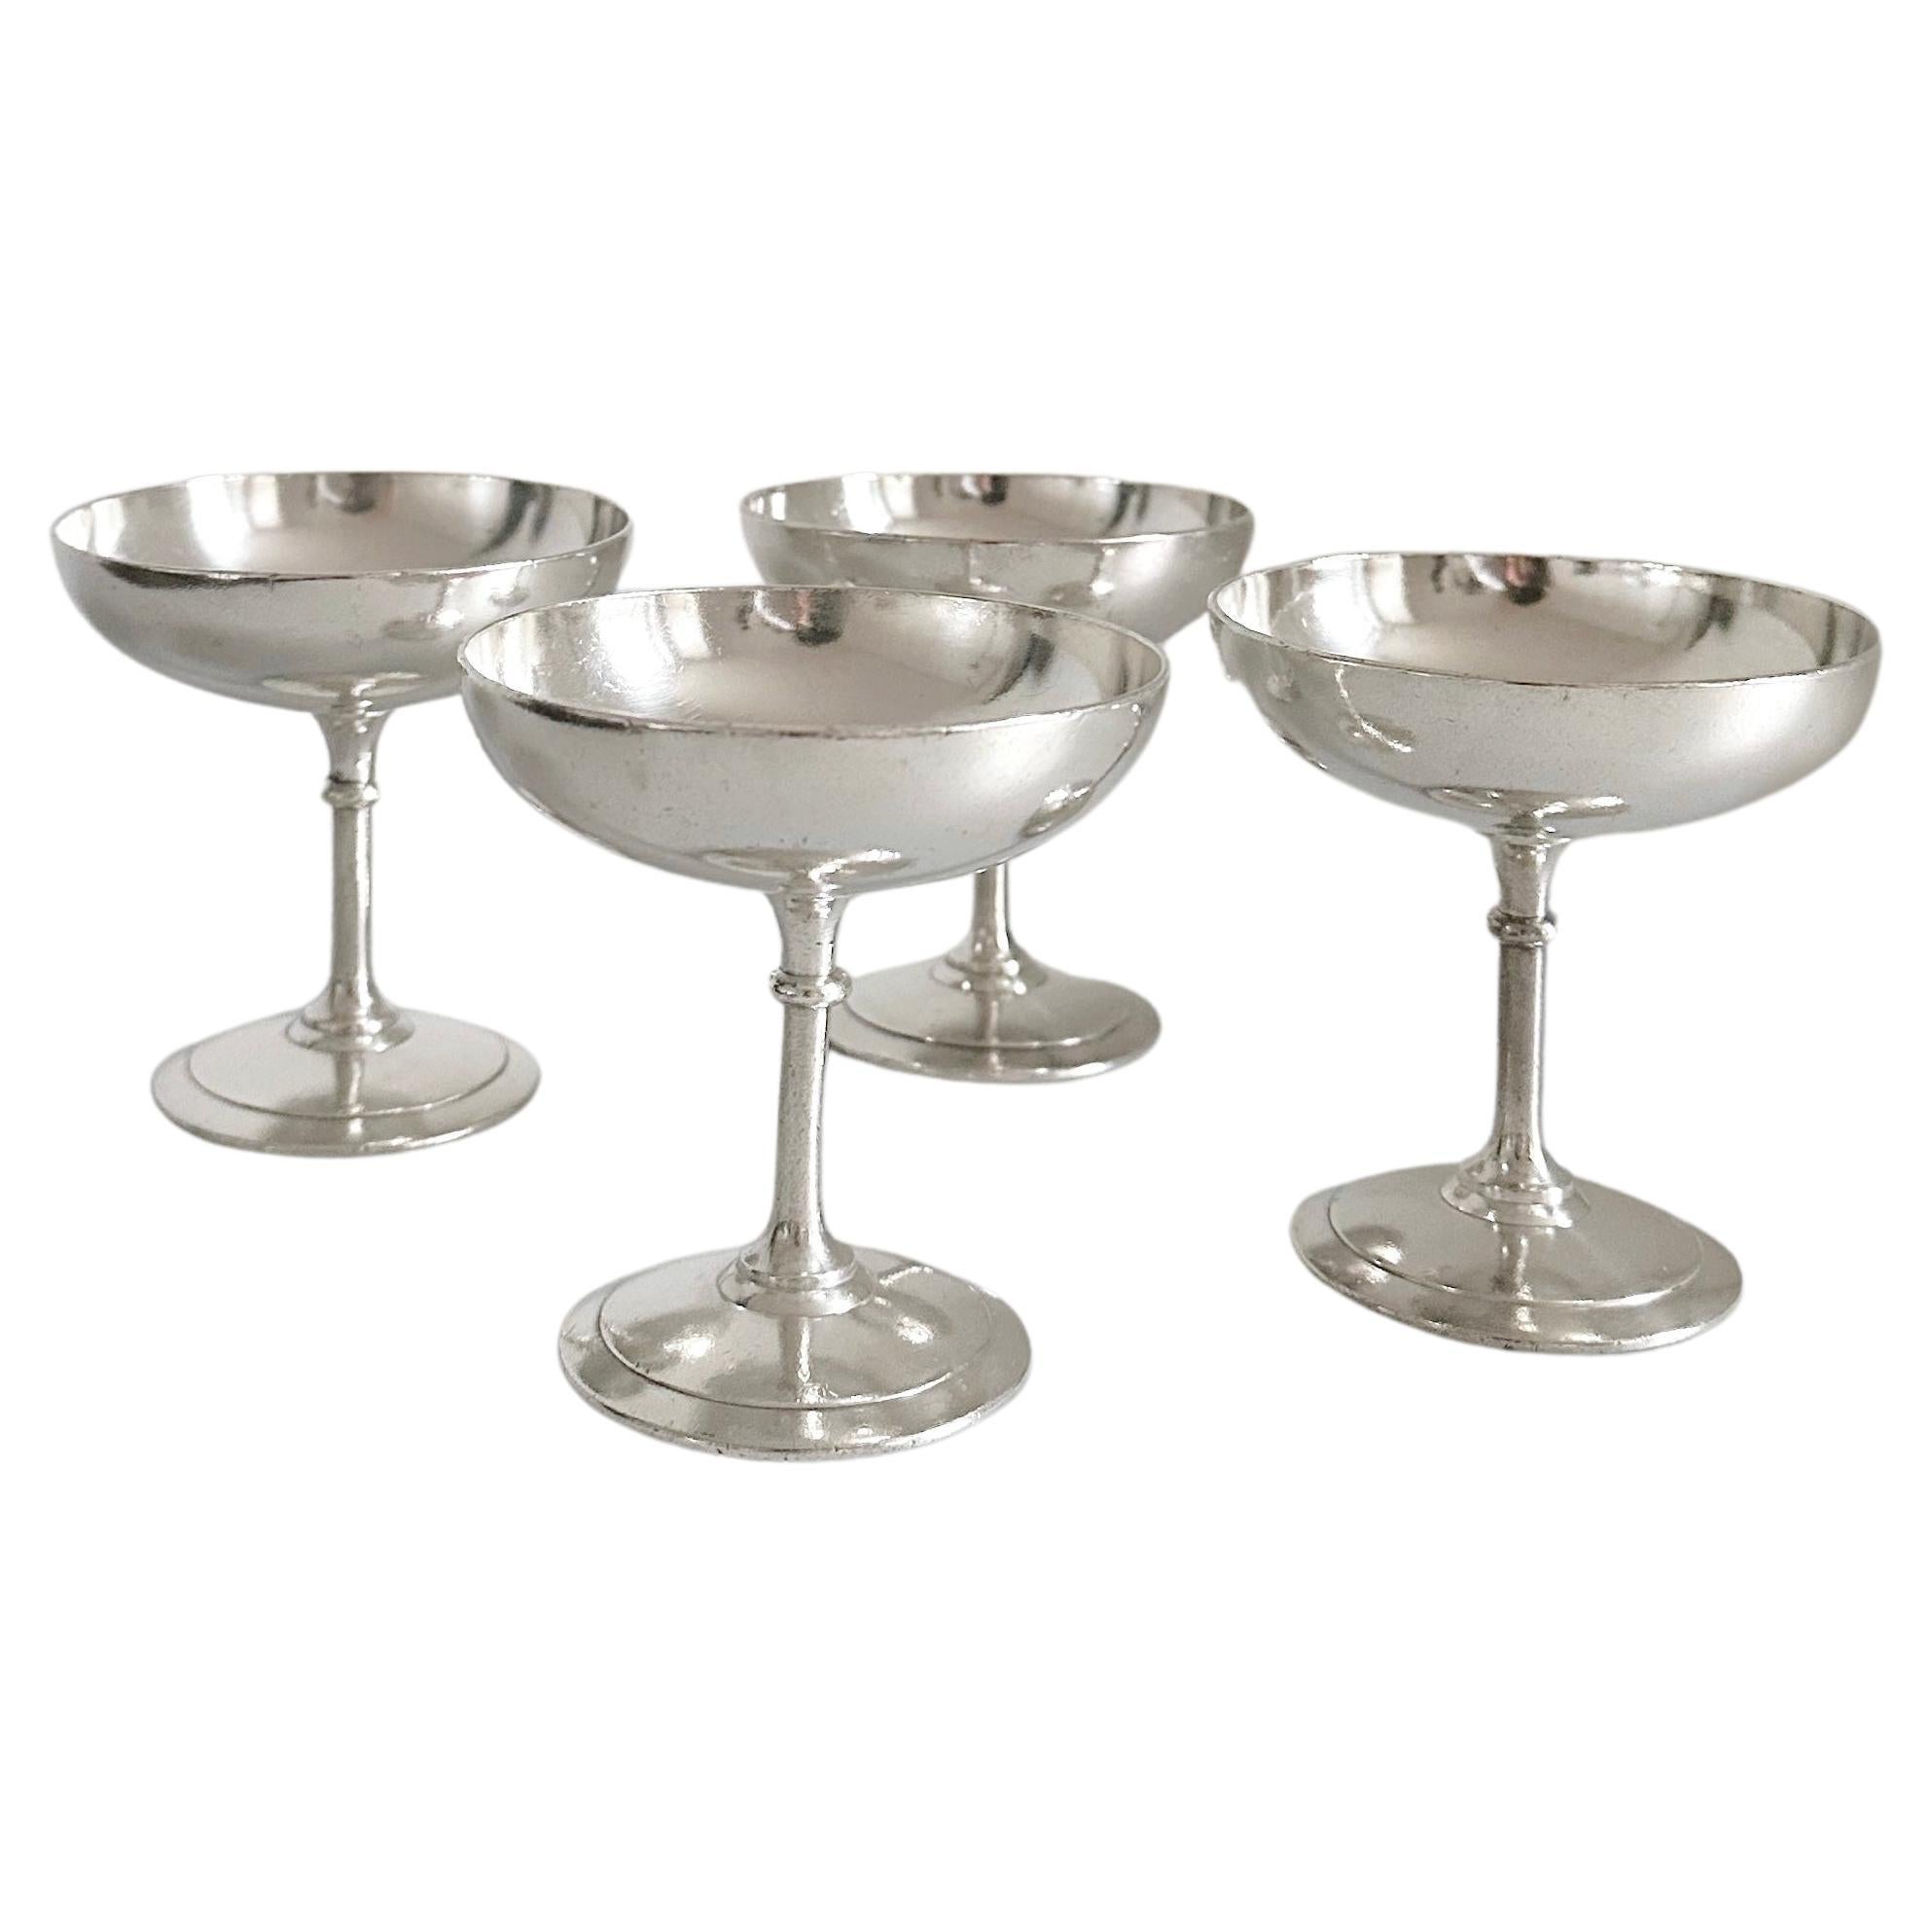 Silver Plated Dessert Bowls by Christofle, Set of 4